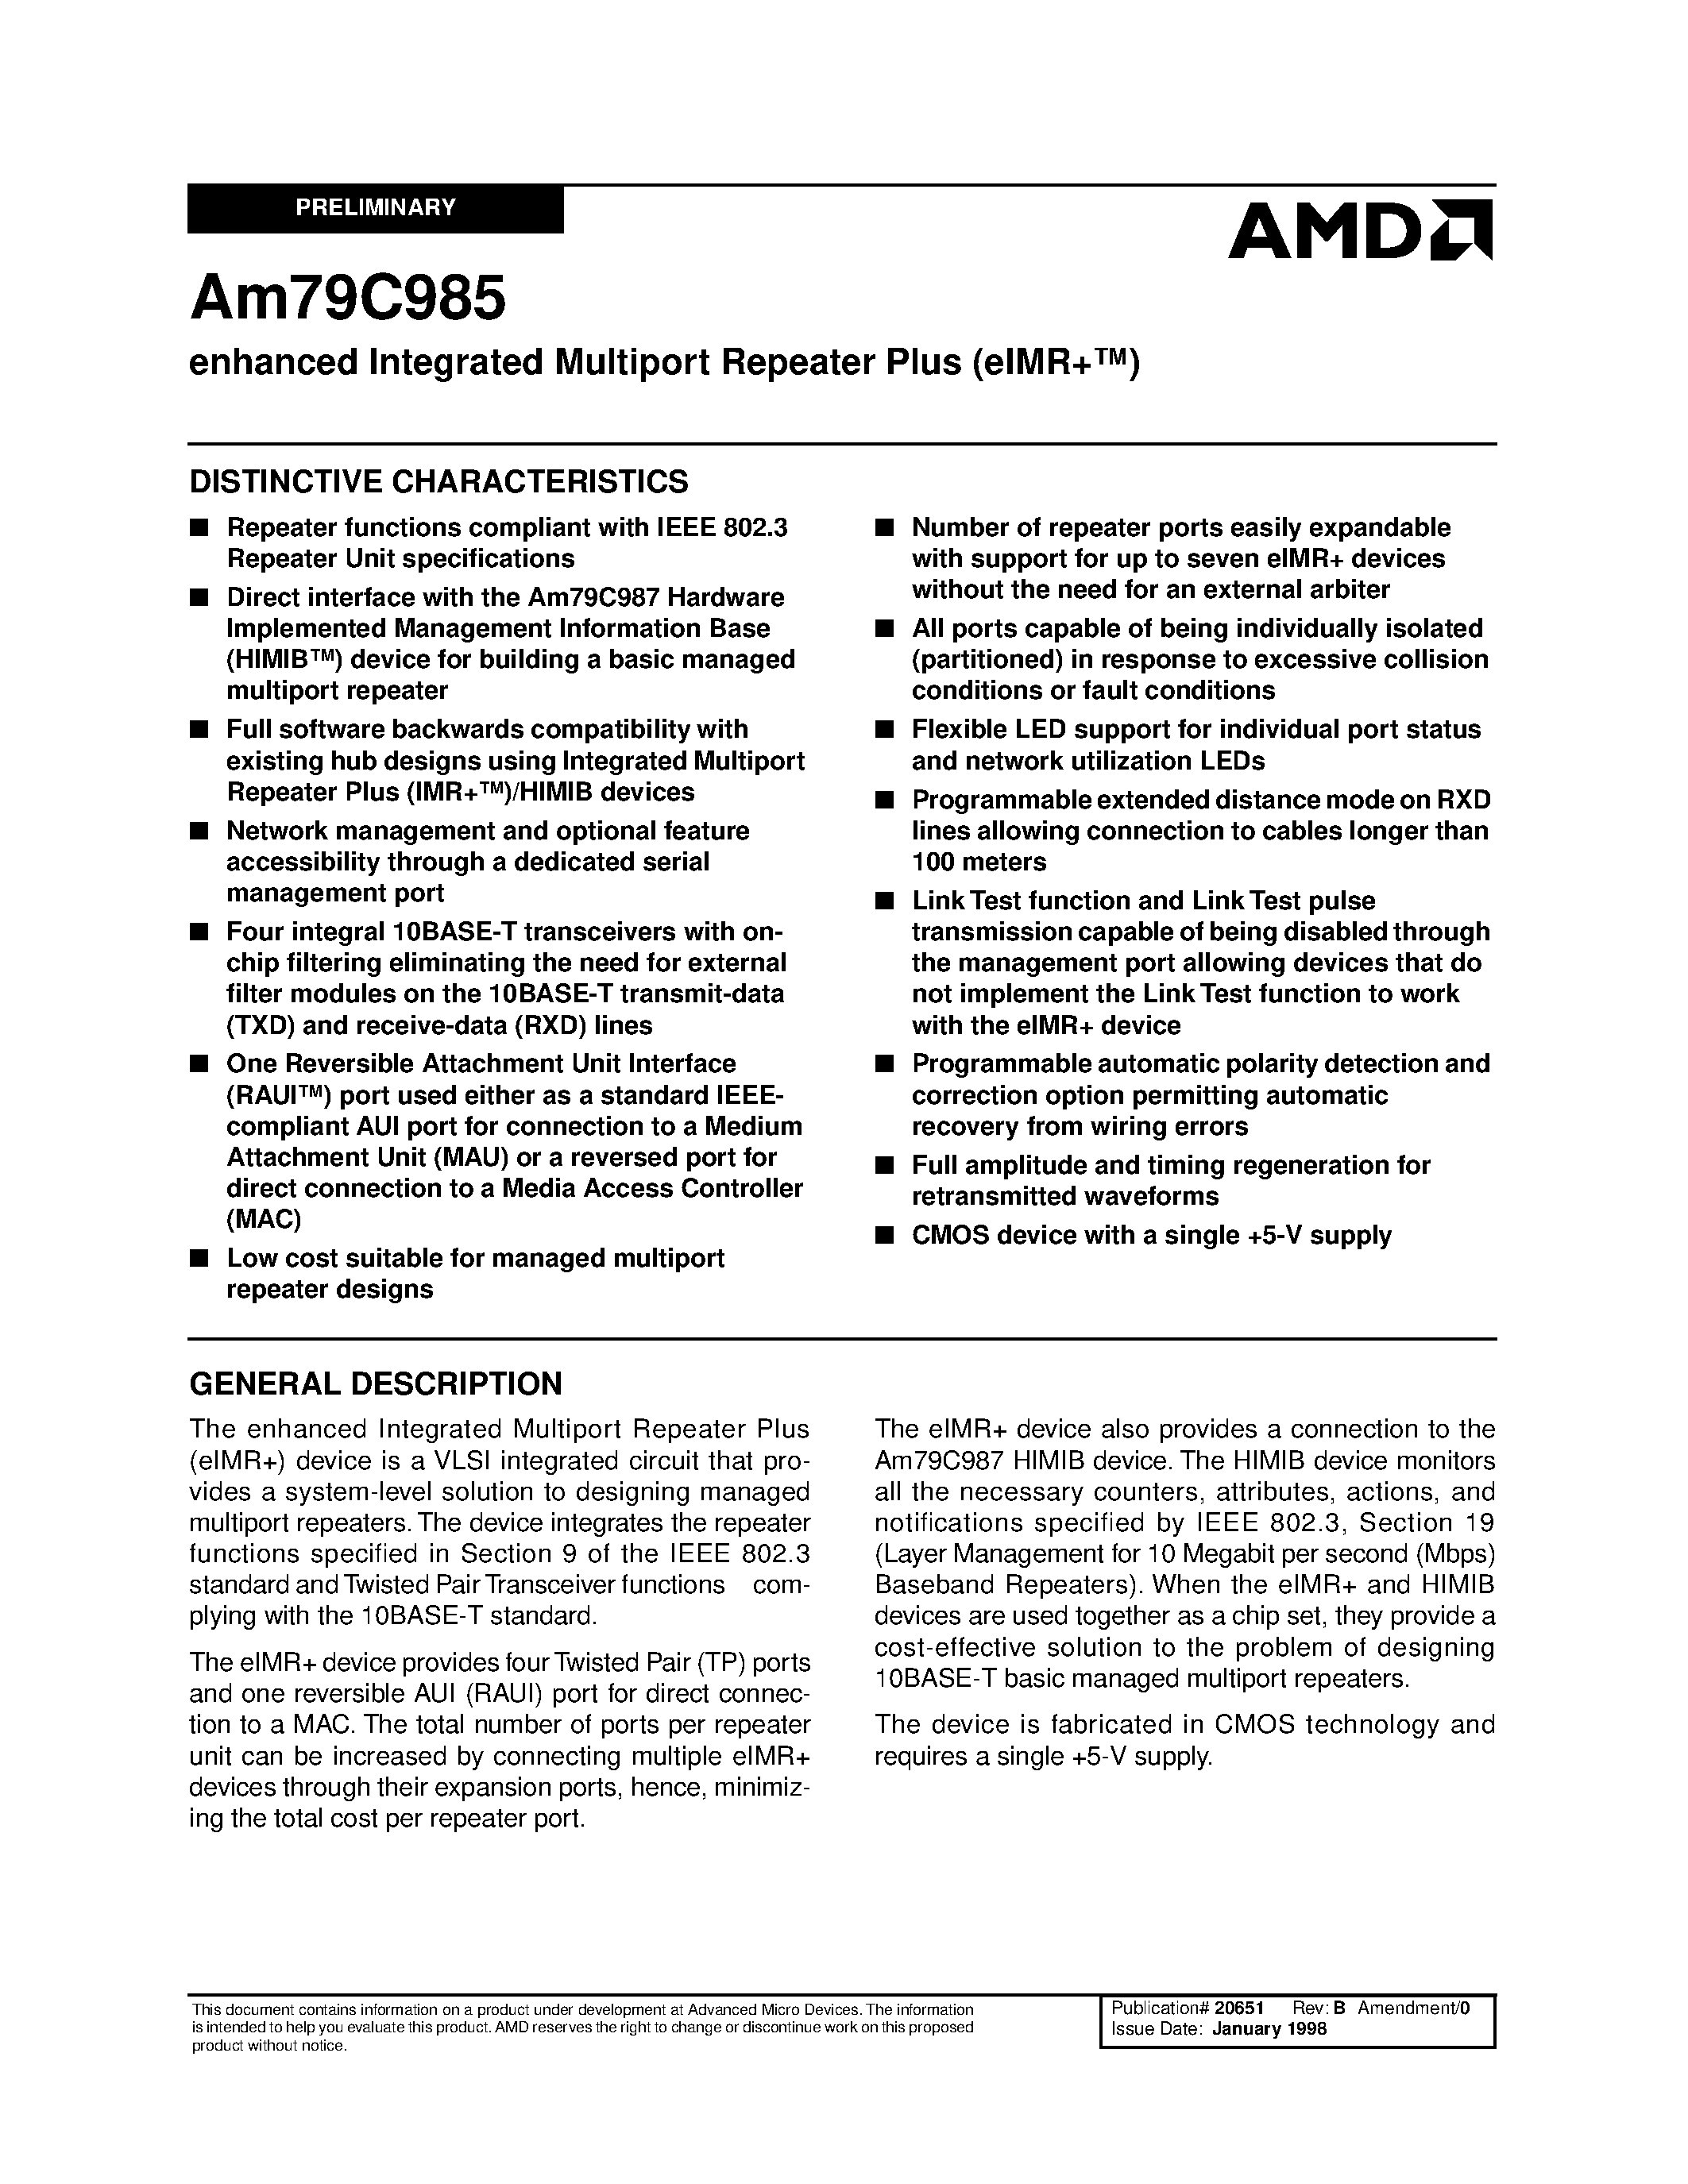 Datasheet Am79C985KCW - enhanced Integrated Multiport Repeater Plus (eIMR+) page 1